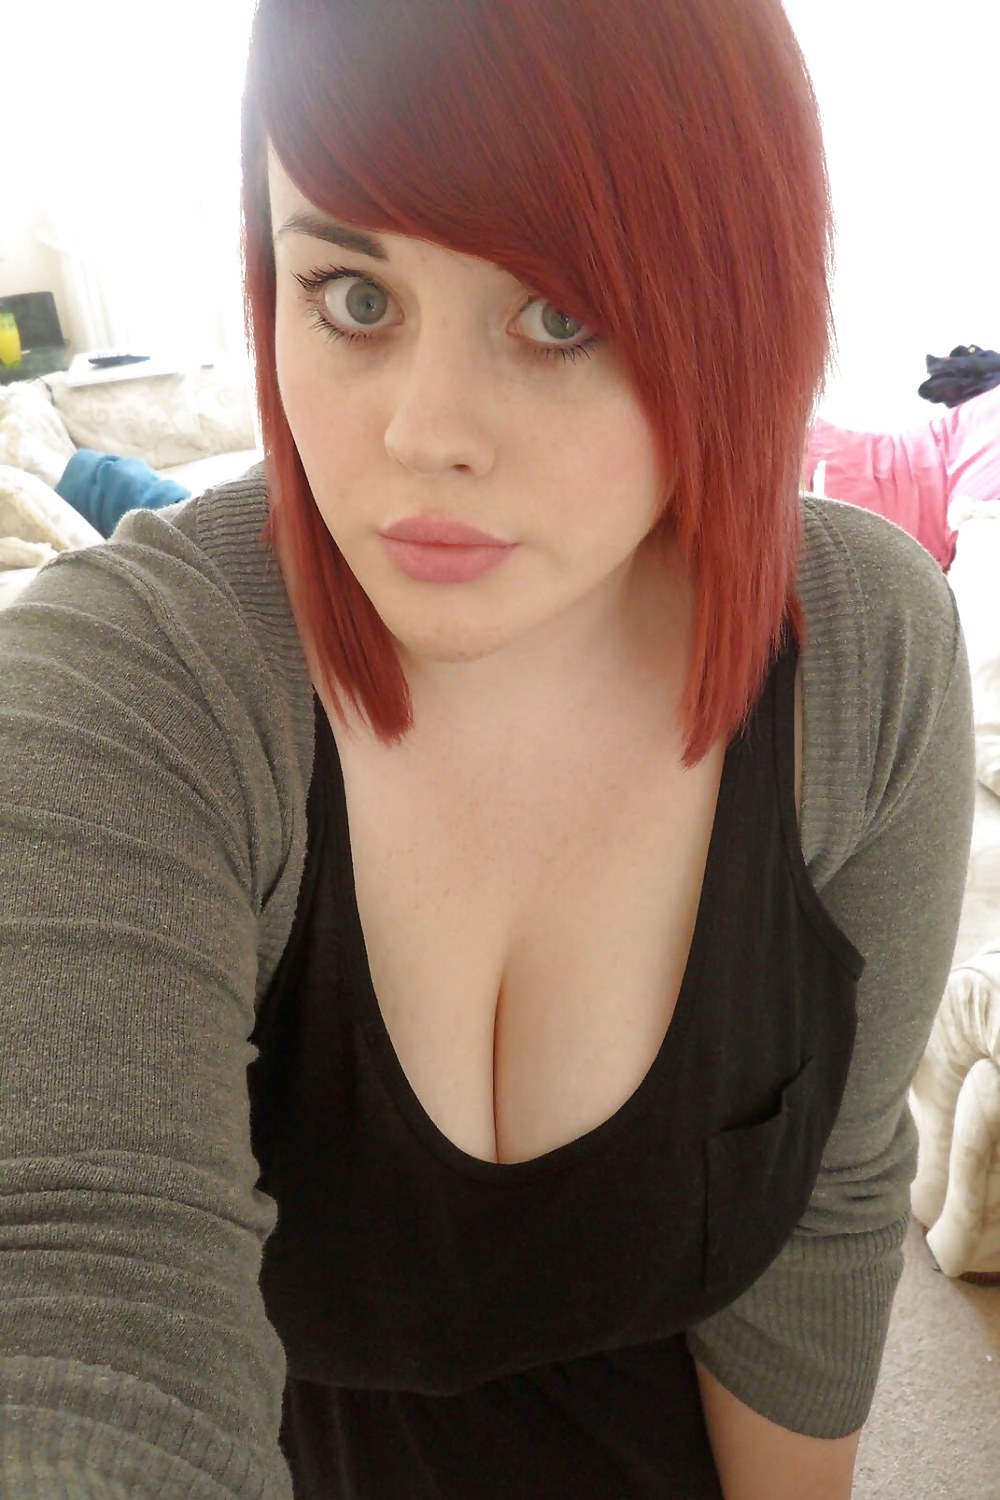 Sex Big-eyed chubby beauty shows off her amazing tits Part 2 image